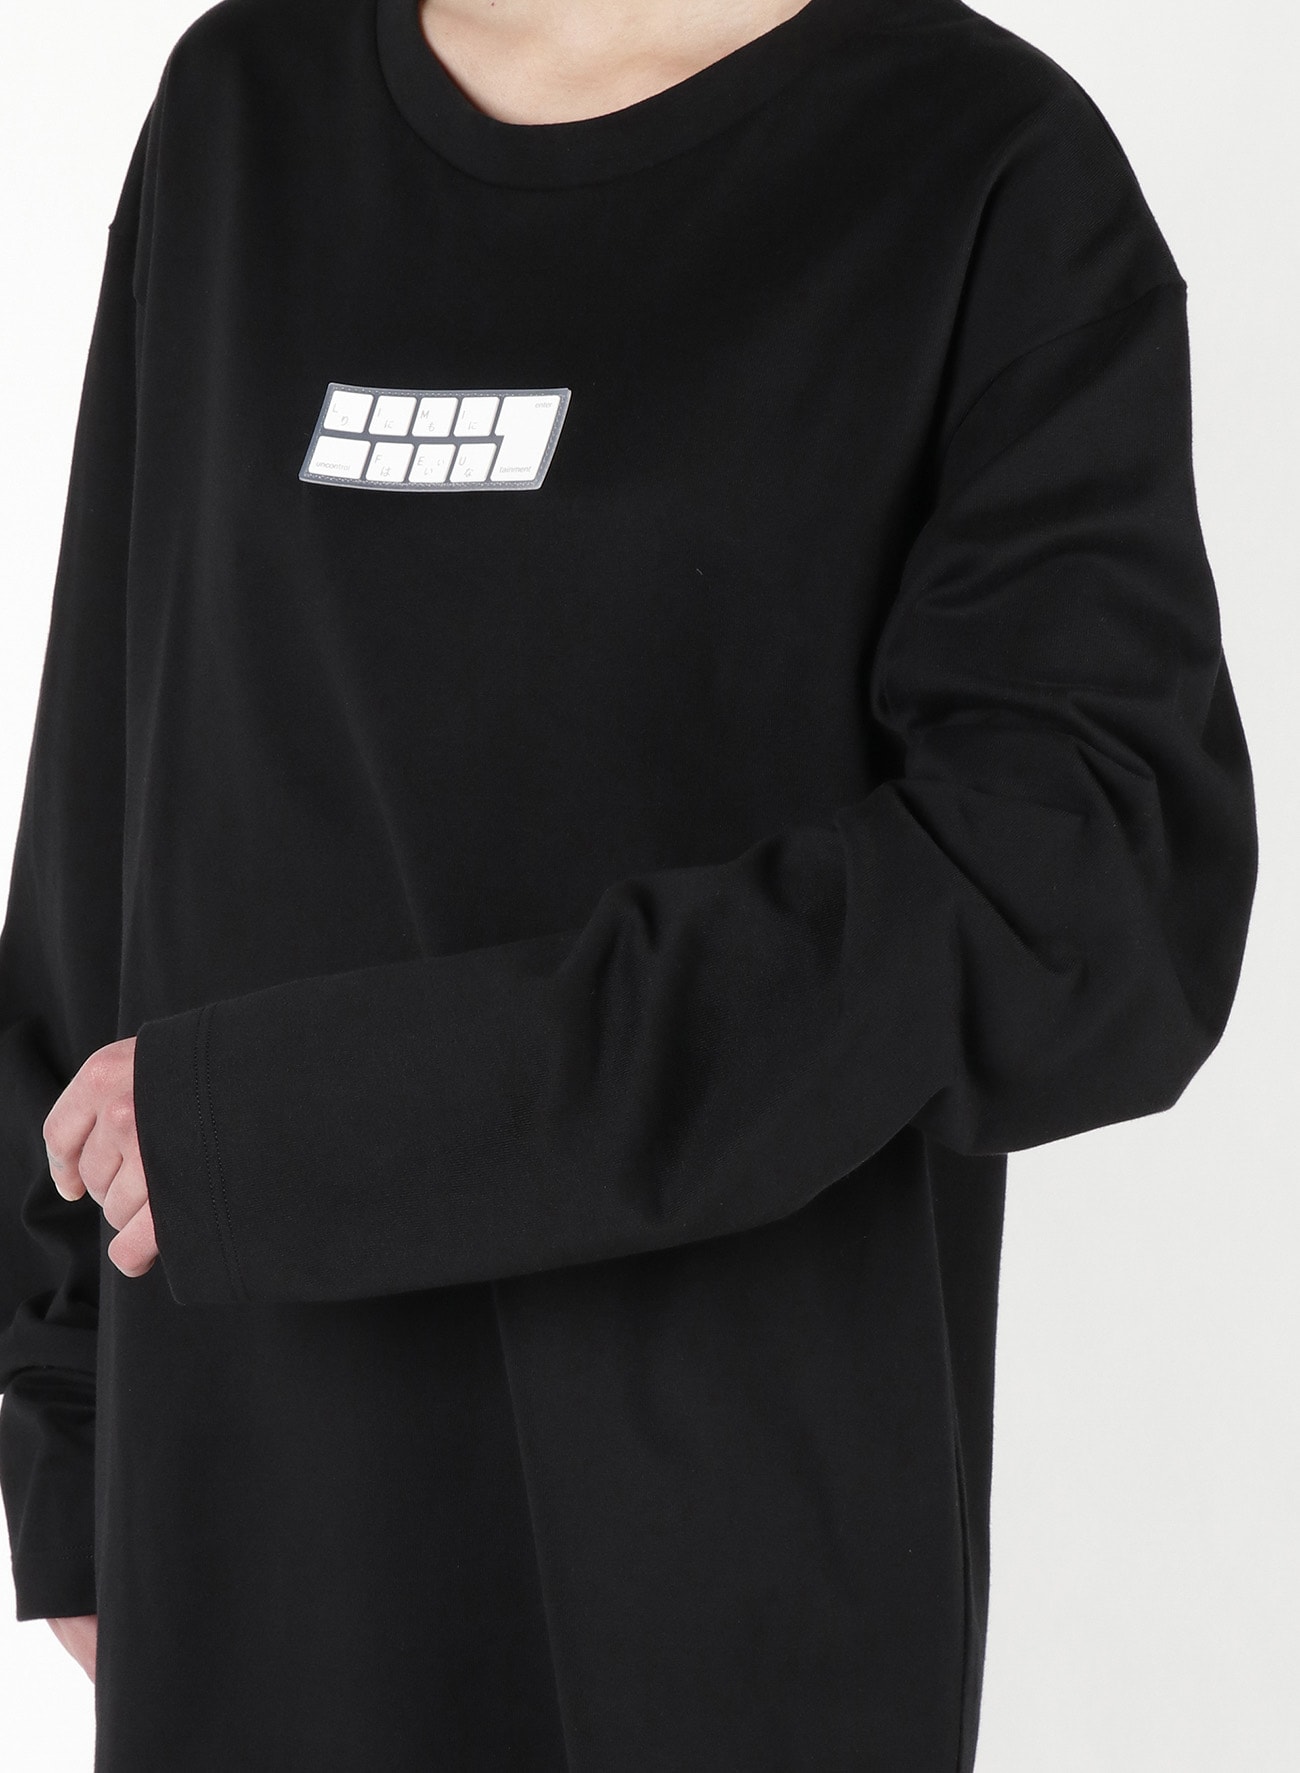 Silicon KeyBoard Oversized Long T-Shirt(S Black): Vintage｜THE 